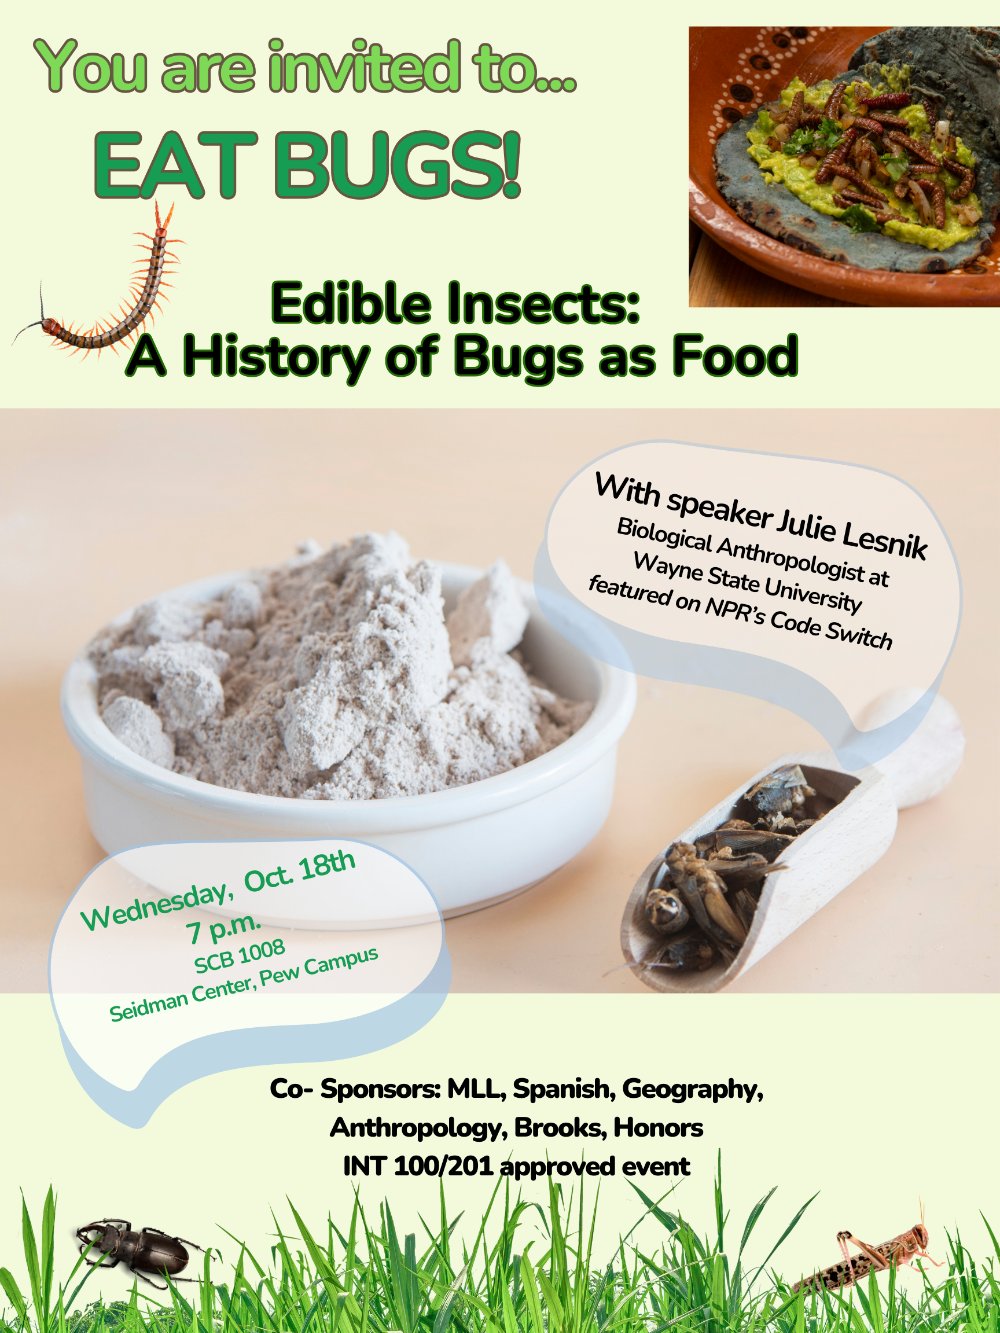 You are invited to eat bugs!